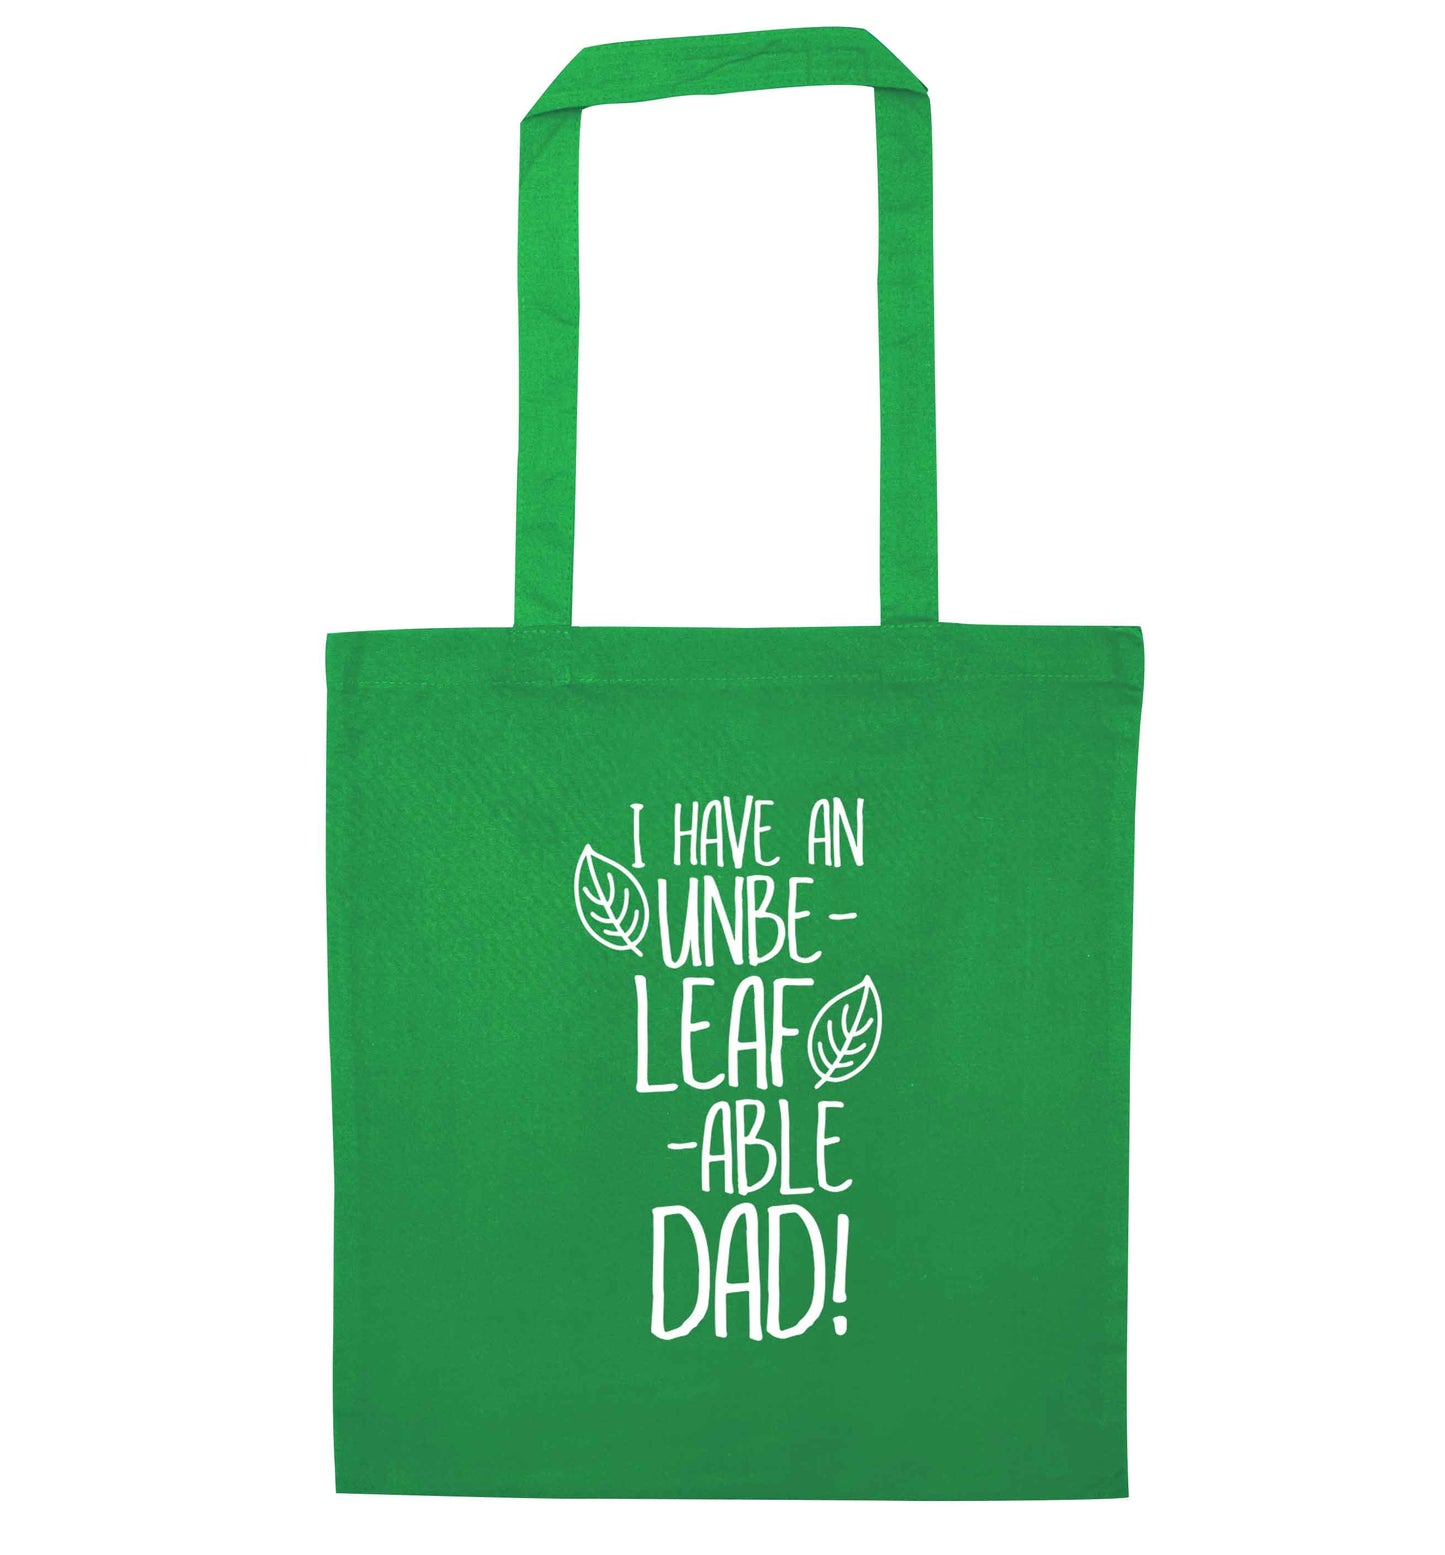 I have an unbe-leaf-able dad green tote bag